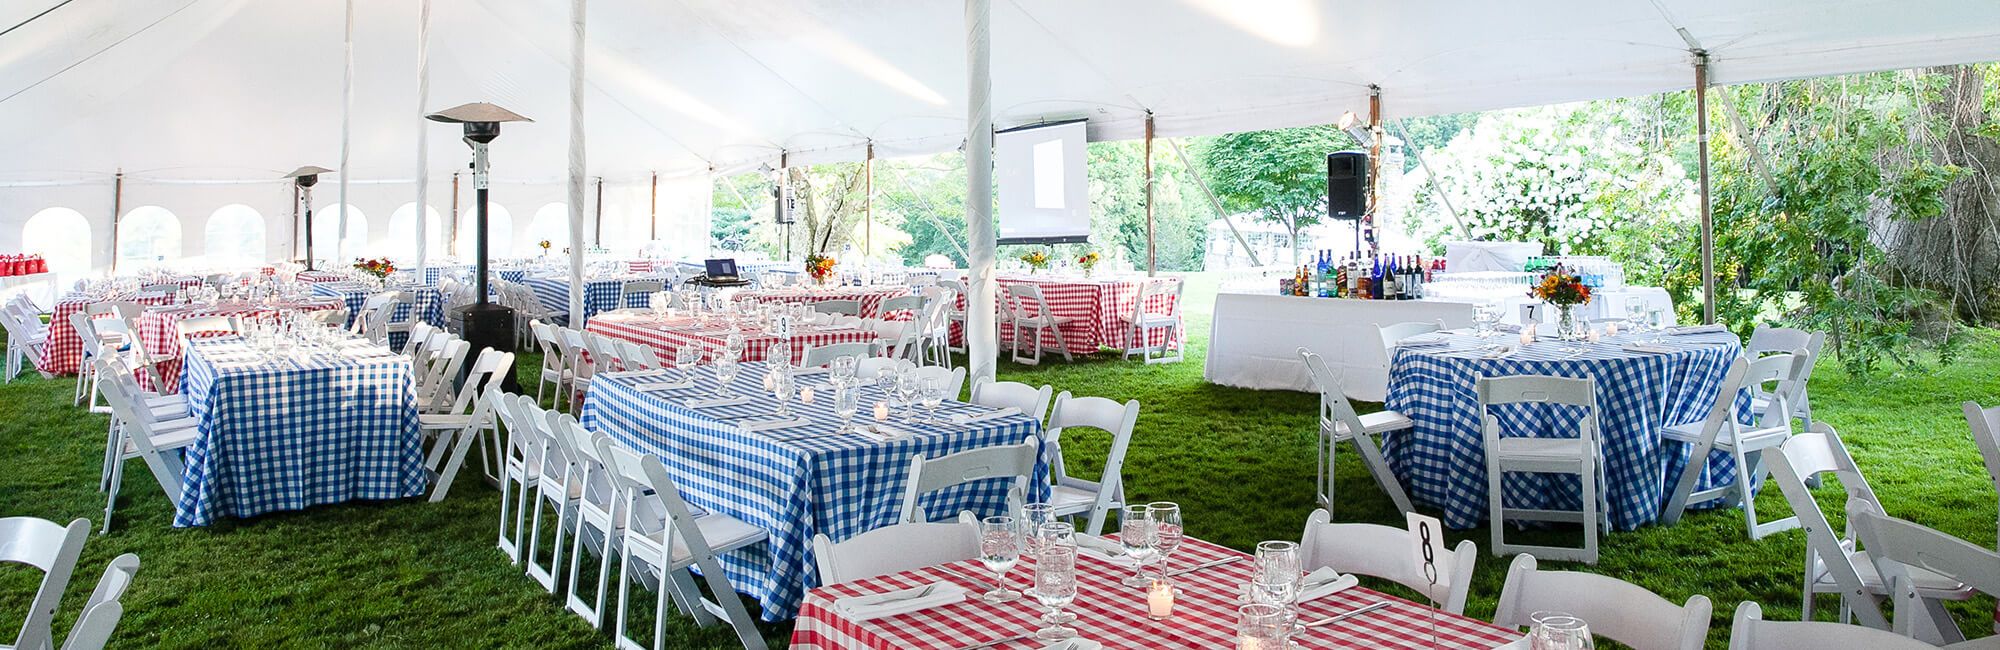 A Corporate Event with red and blue tablecloths